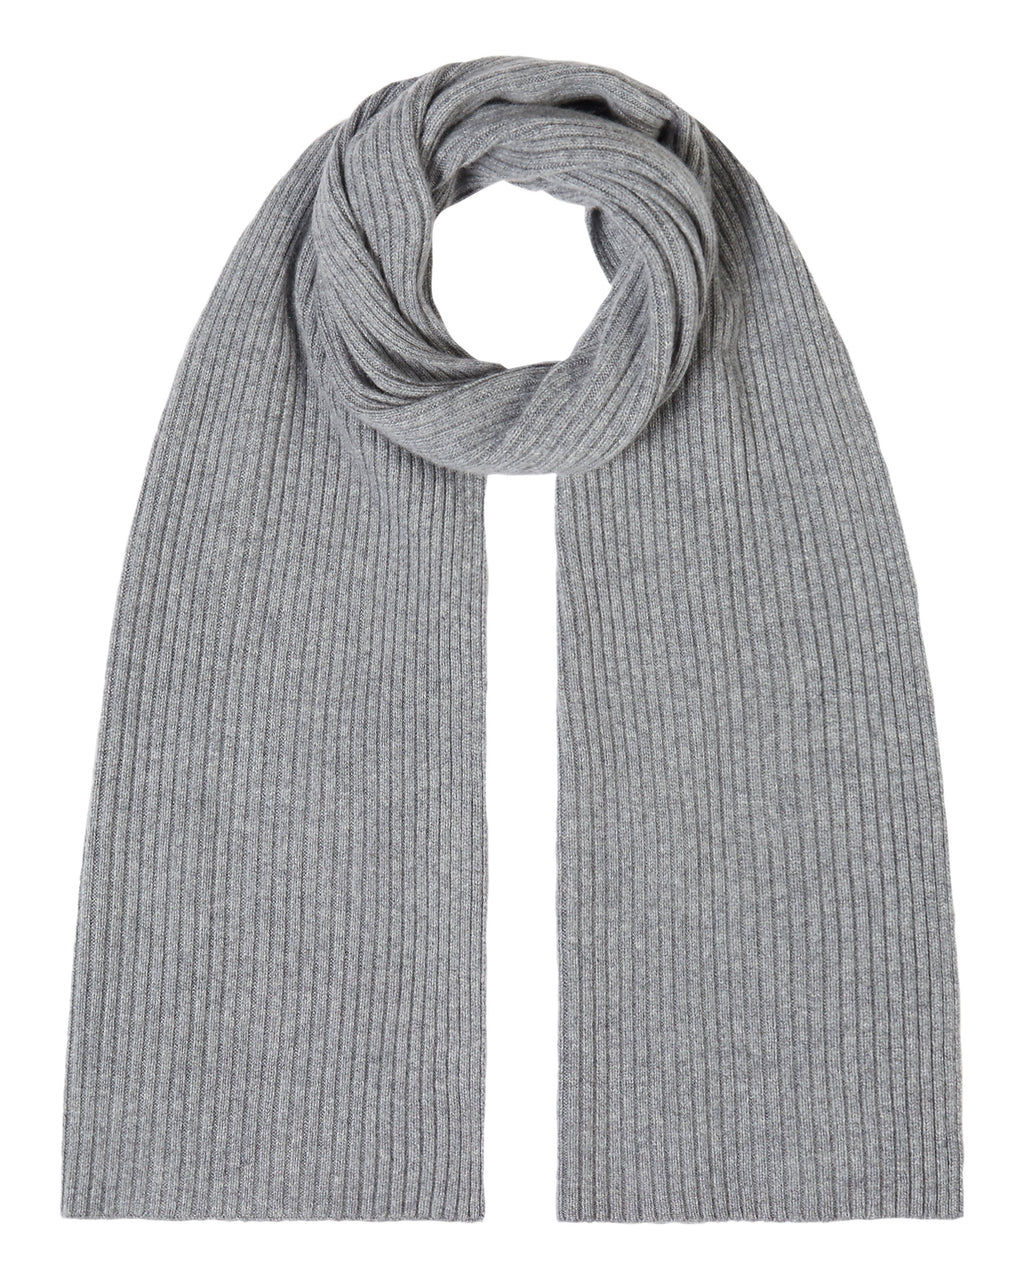 Unisex Woven Cashmere Scarf Camel Brown